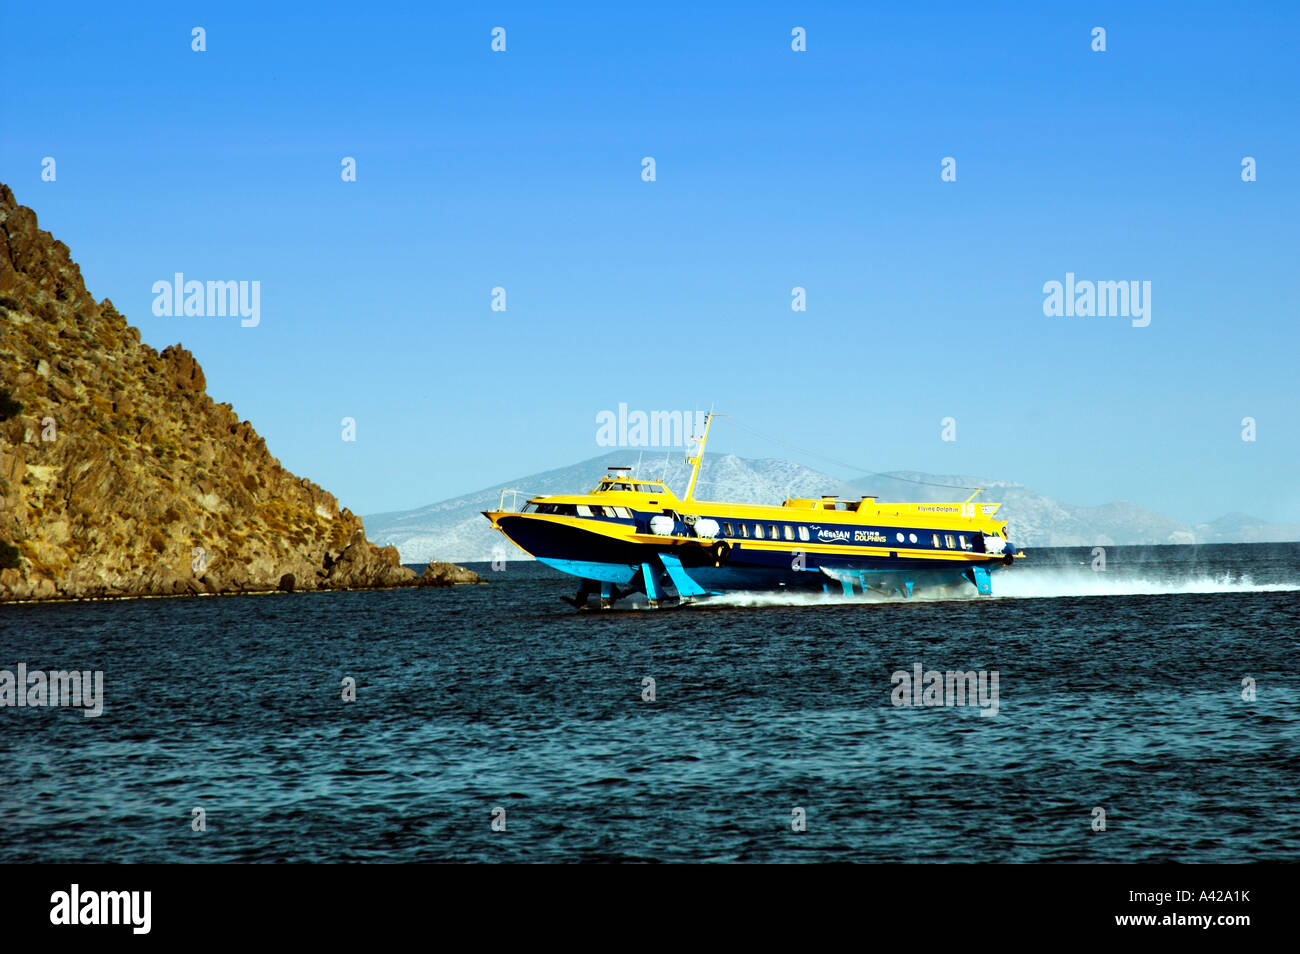 The Flying Dolphin high speed hydrophoil in the harbor of Scala on the island of Patmos Greece Stock Photo